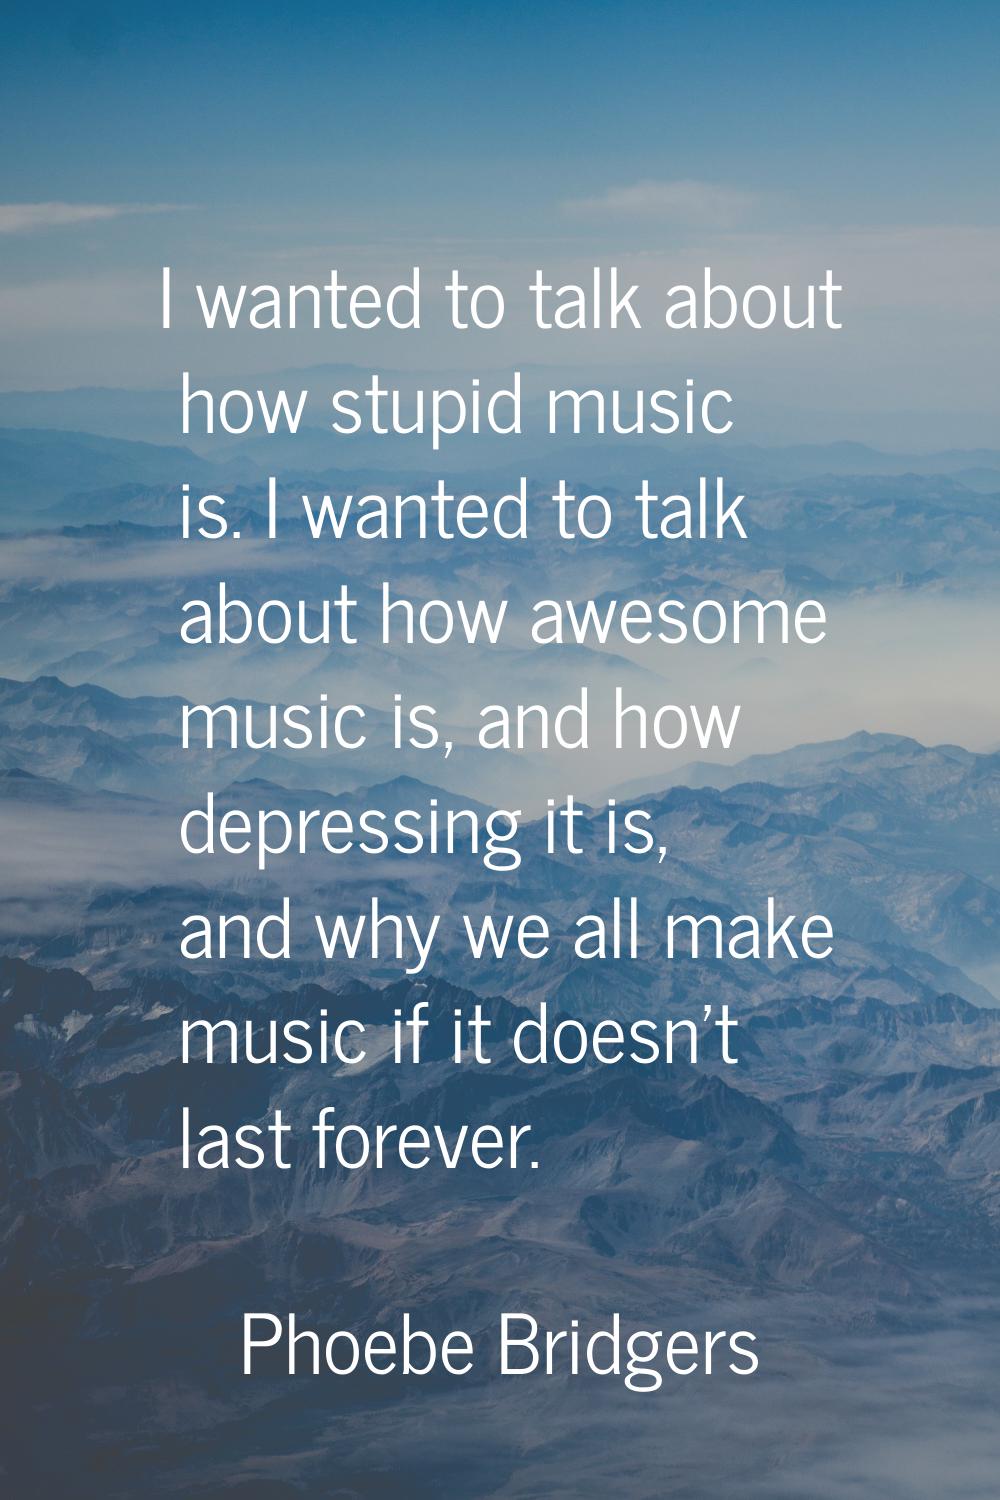 I wanted to talk about how stupid music is. I wanted to talk about how awesome music is, and how de